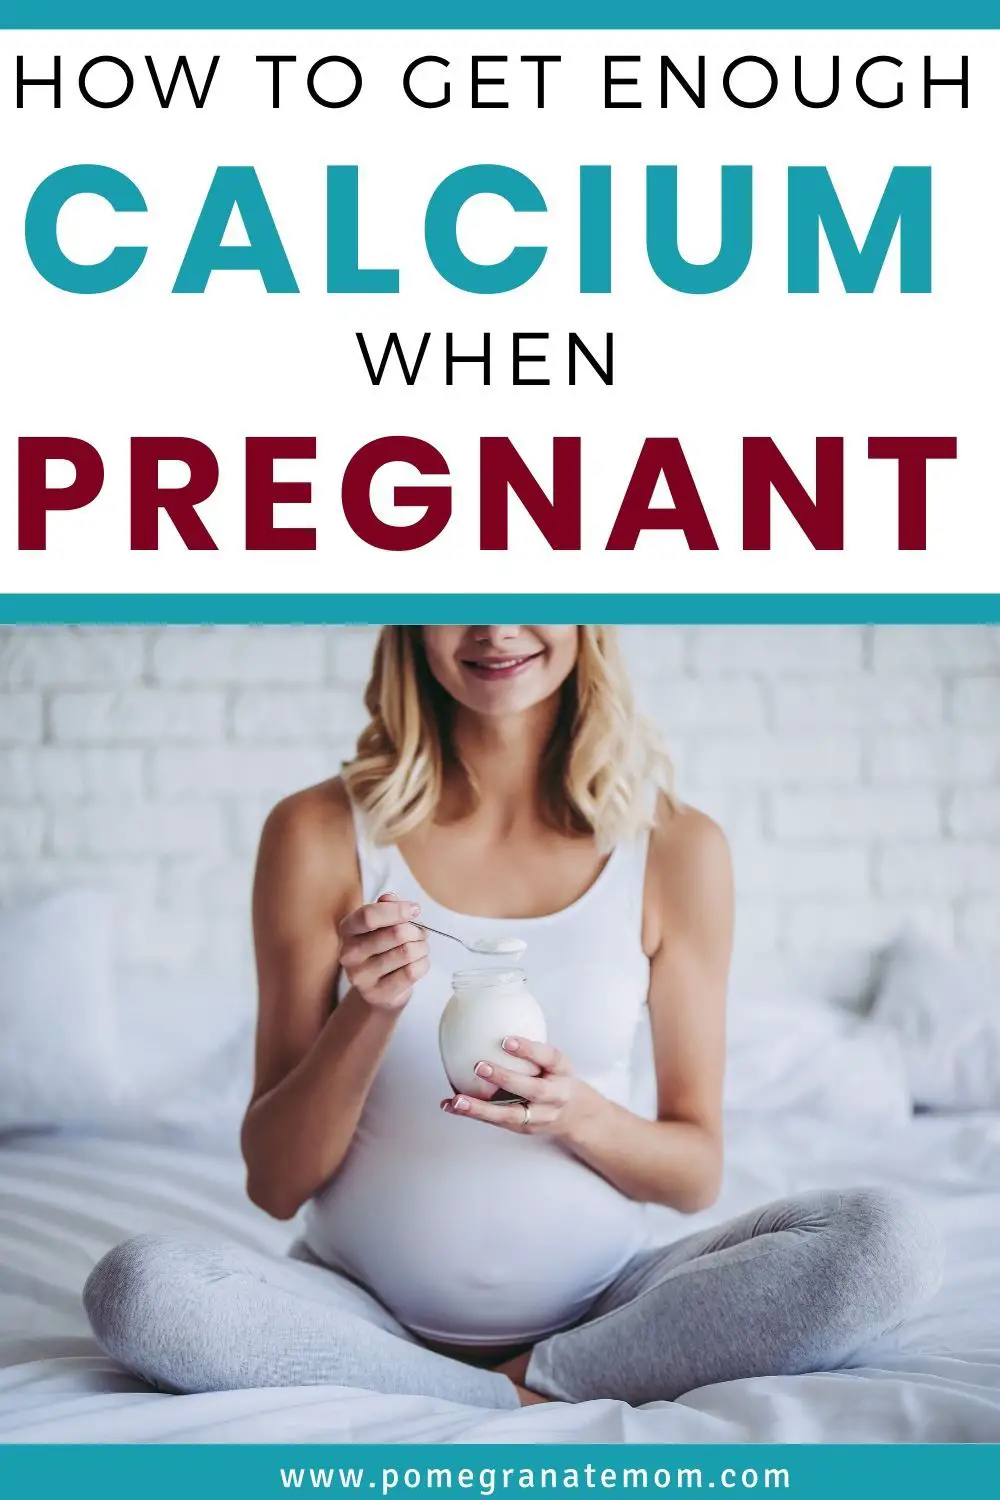 All You Need to Know to Get Enough Calcium When Pregnant